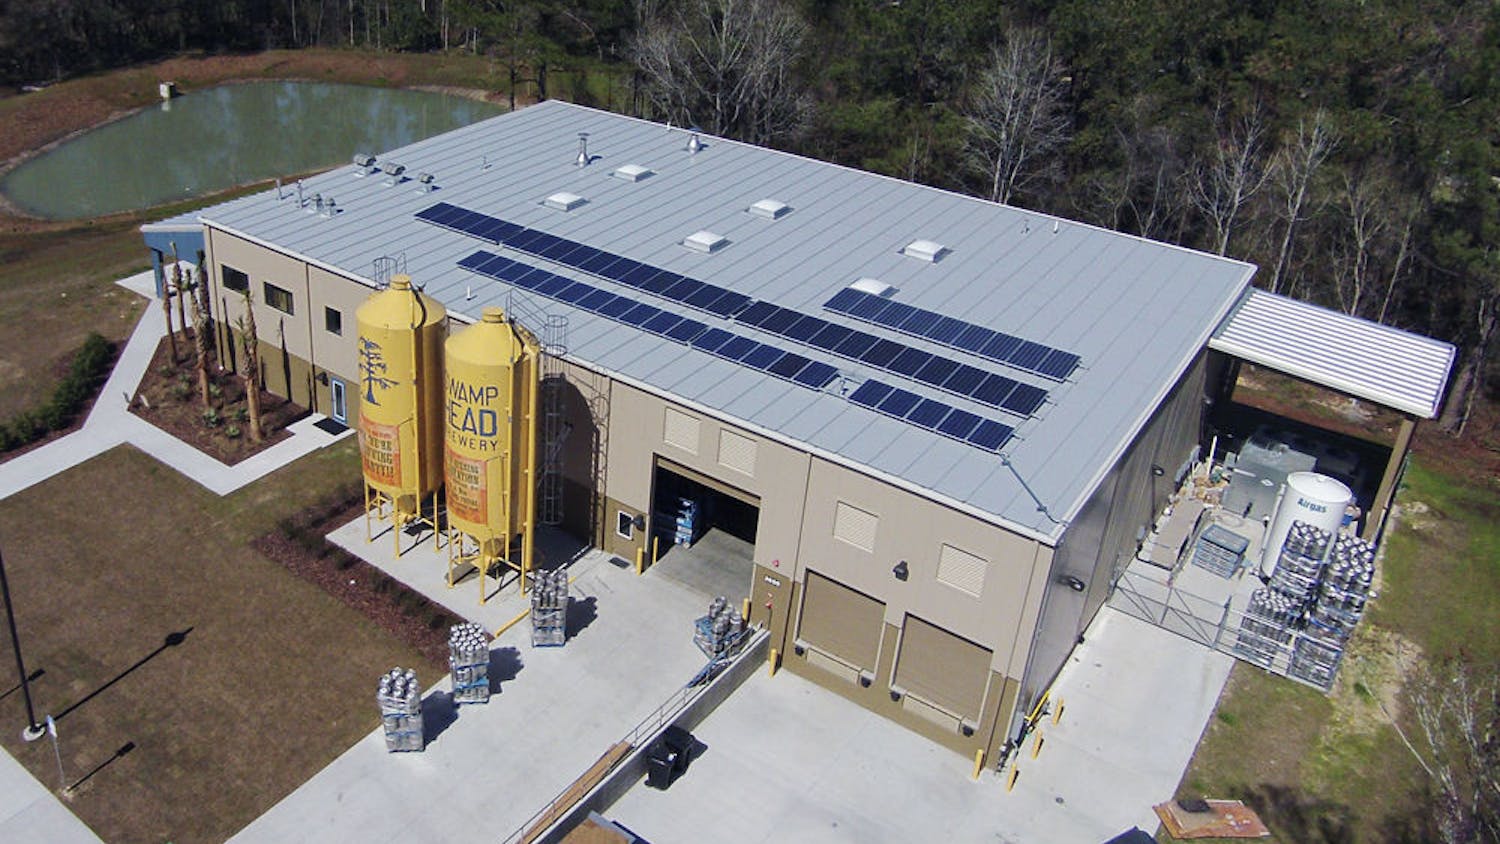 Taken from an aerial, remote-control drone, this photo shows Swamp Head Brewery’s solar panel installation mounted on the roof of the building.